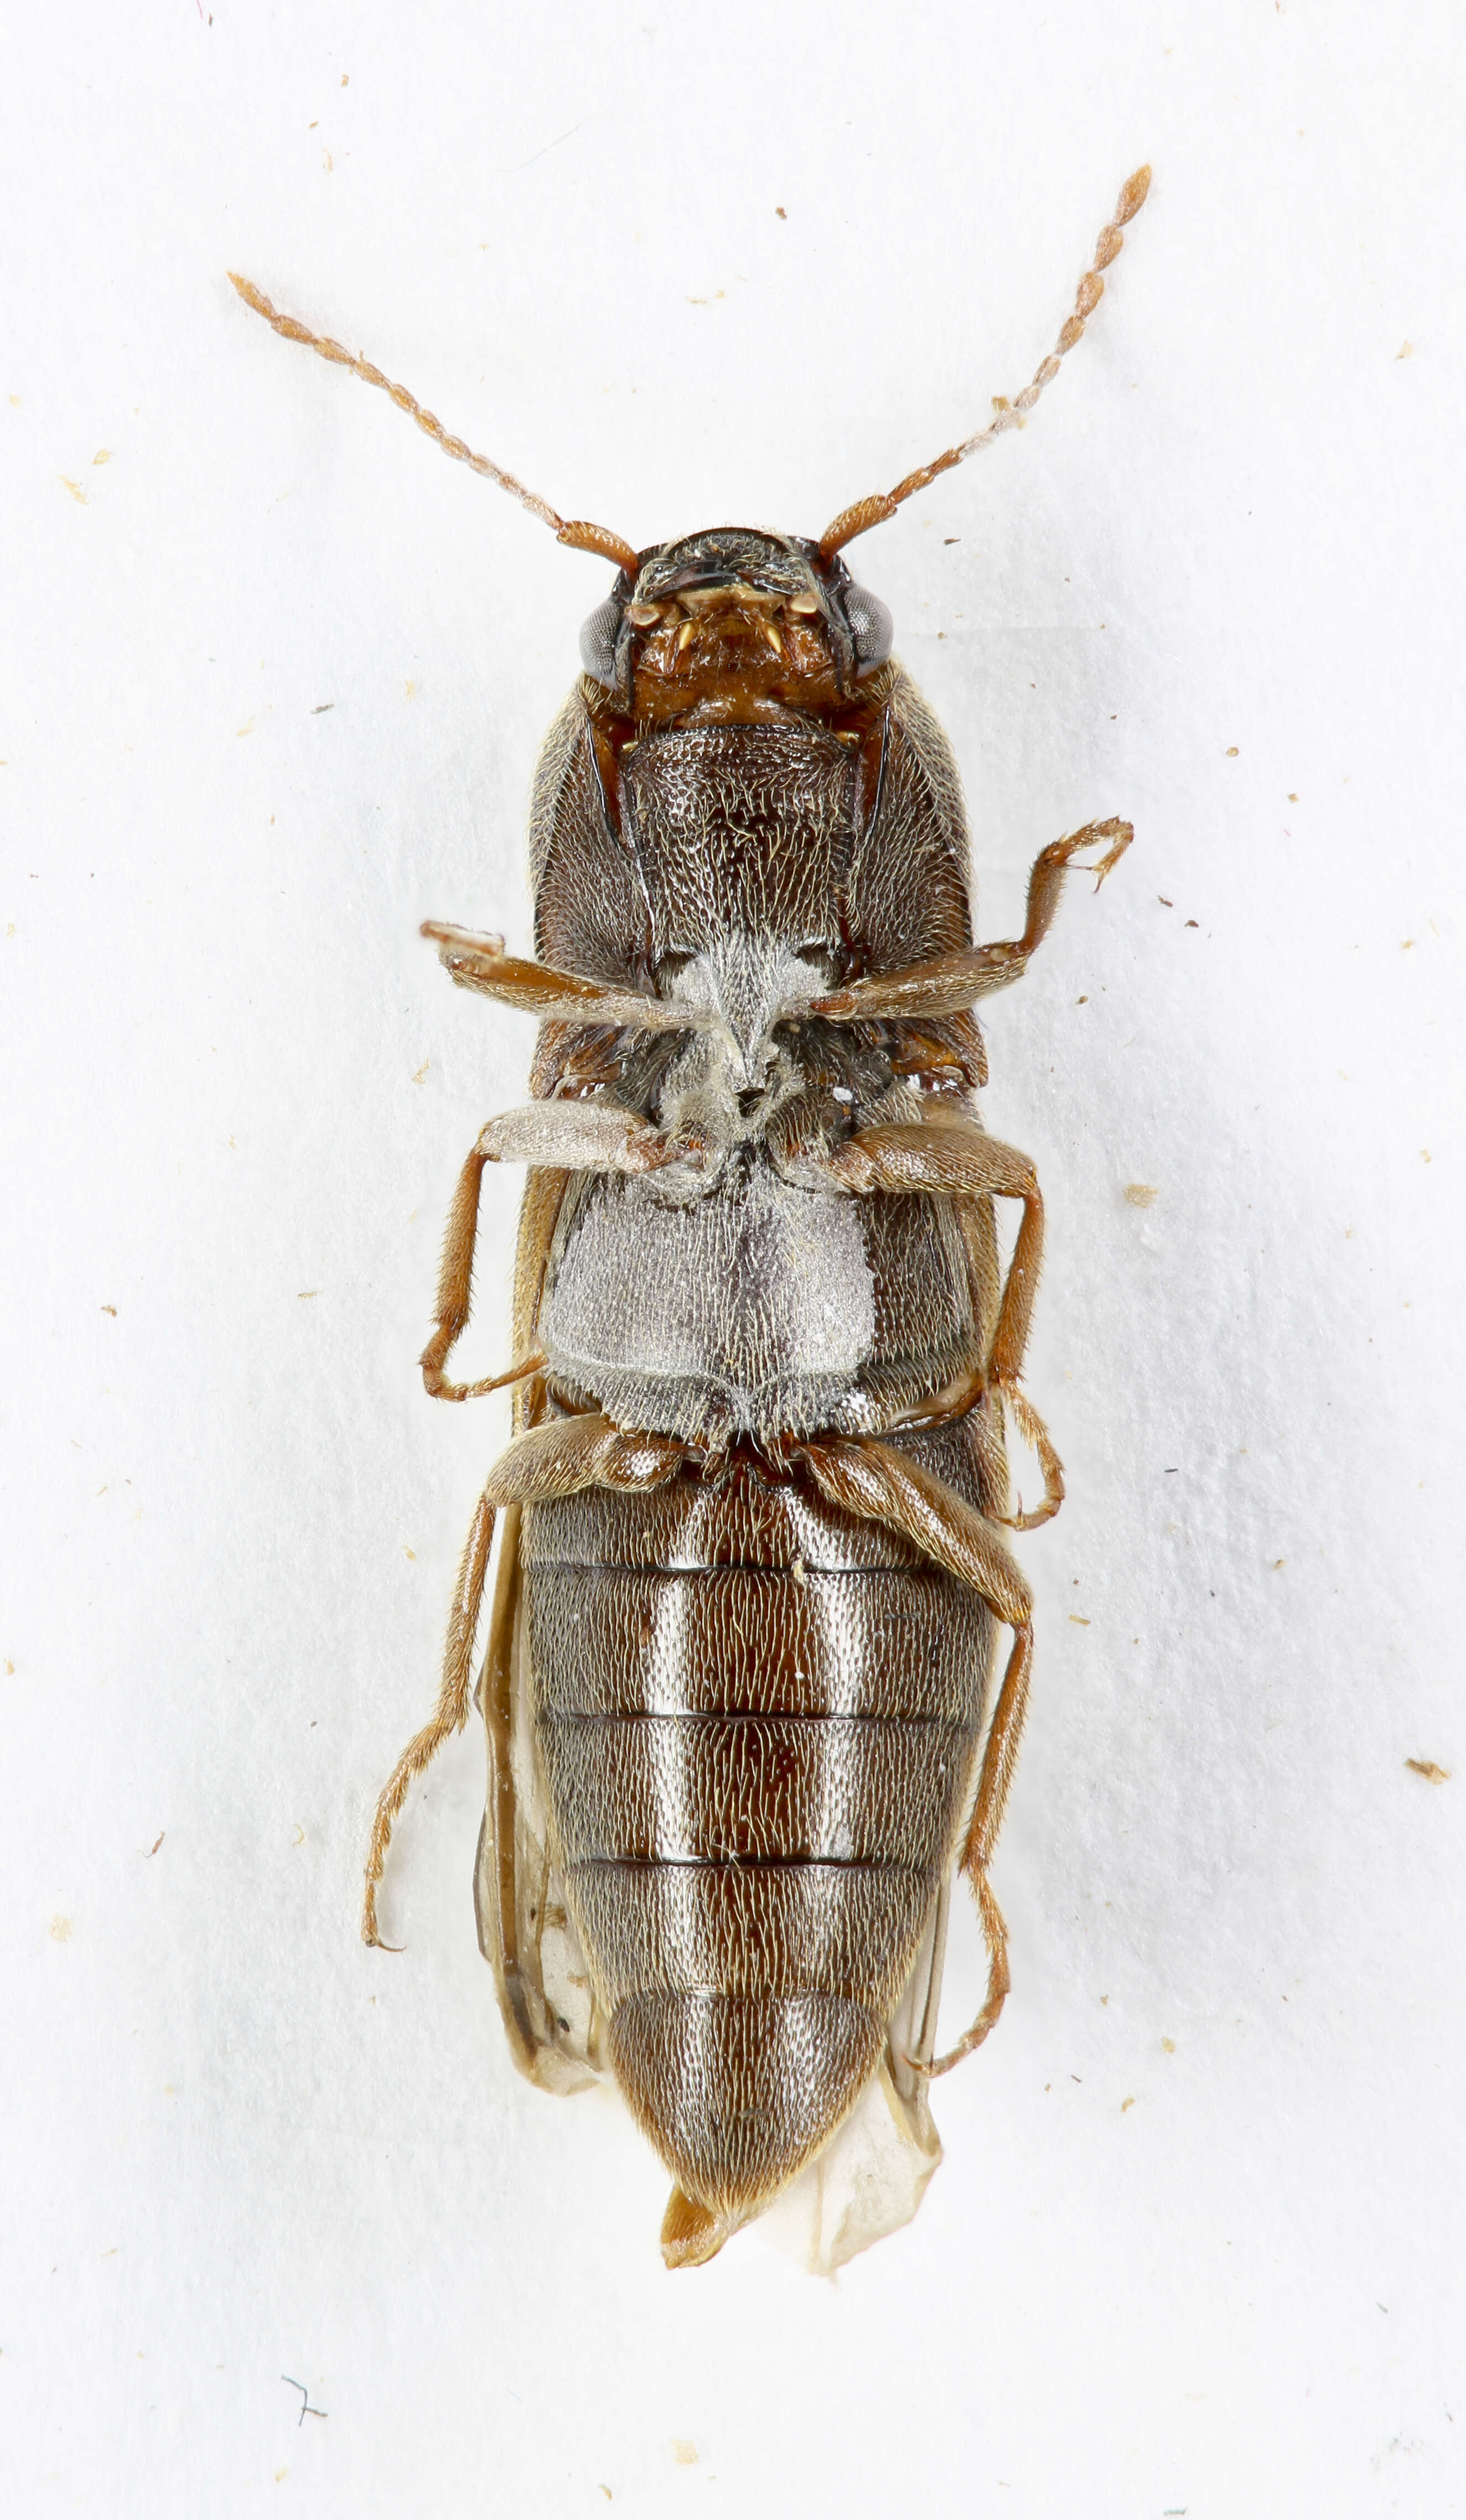 Image of Agriotes